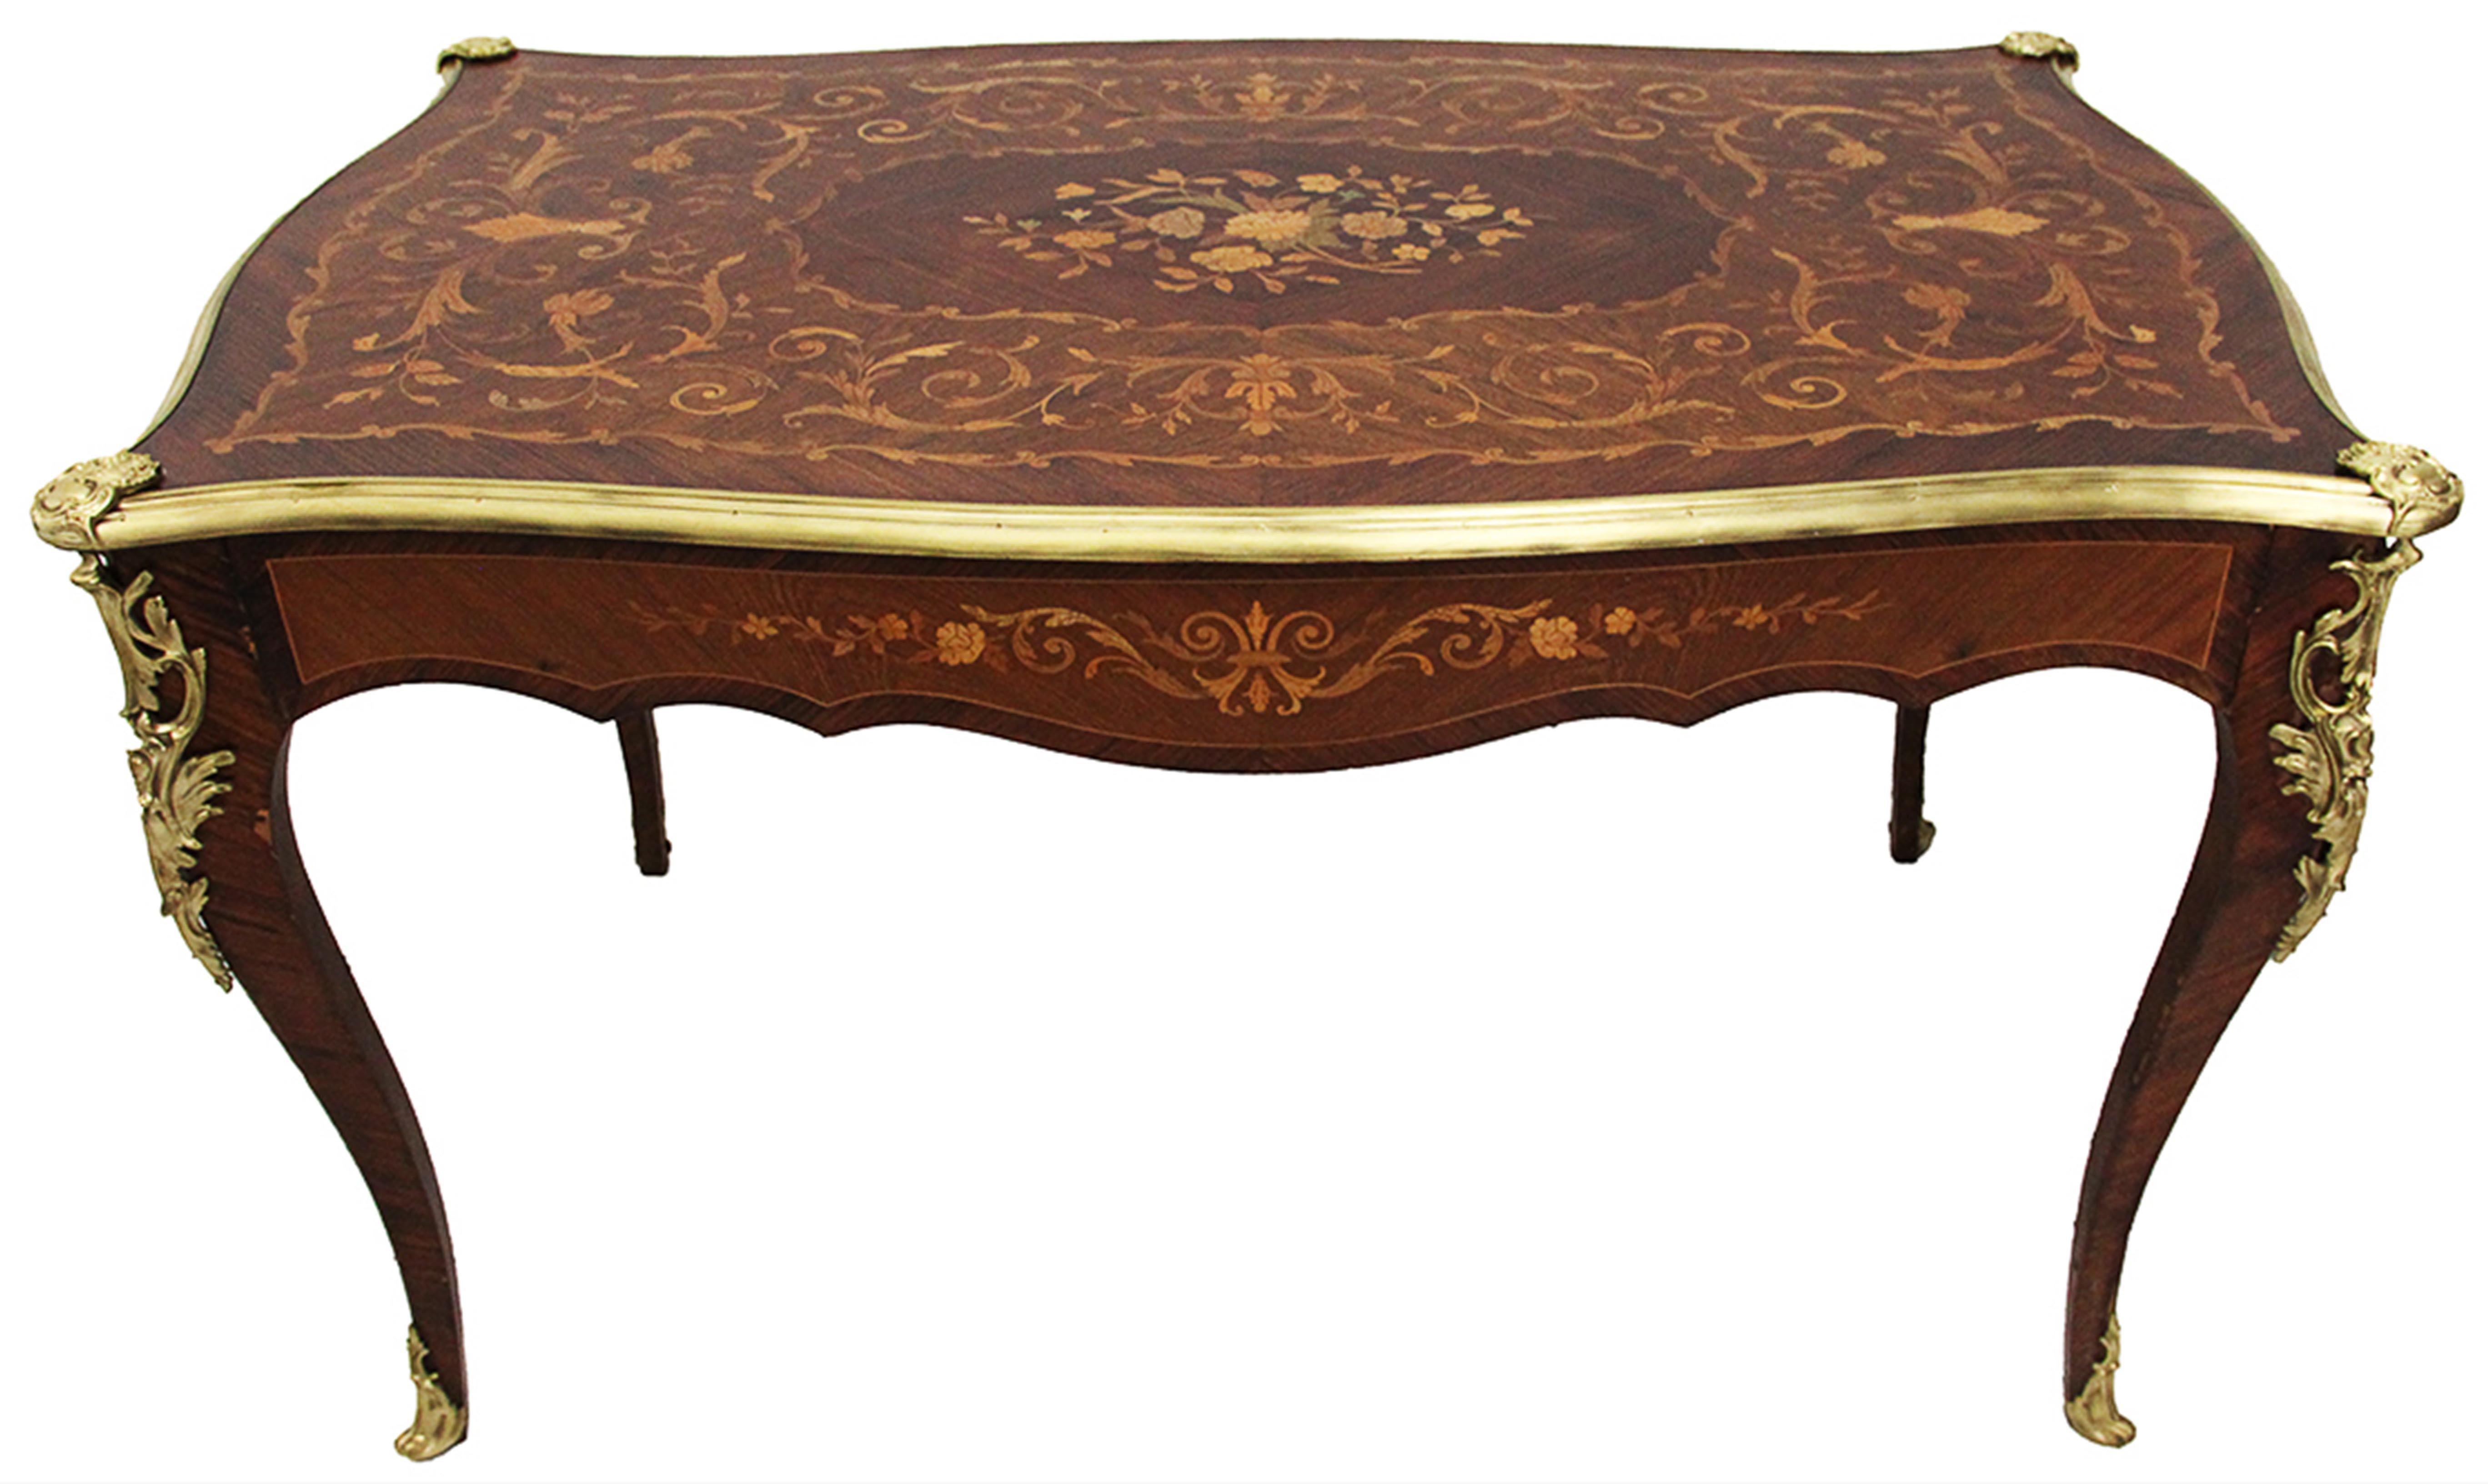 French 19th century Louis XV style table with flower marquetry and bronze framed
Violon-shaped writing table or desk, decorated with superb marquetry and Louis XV style bronzes.
French furniture of the 19th century, Louis XV style.
Dimensions